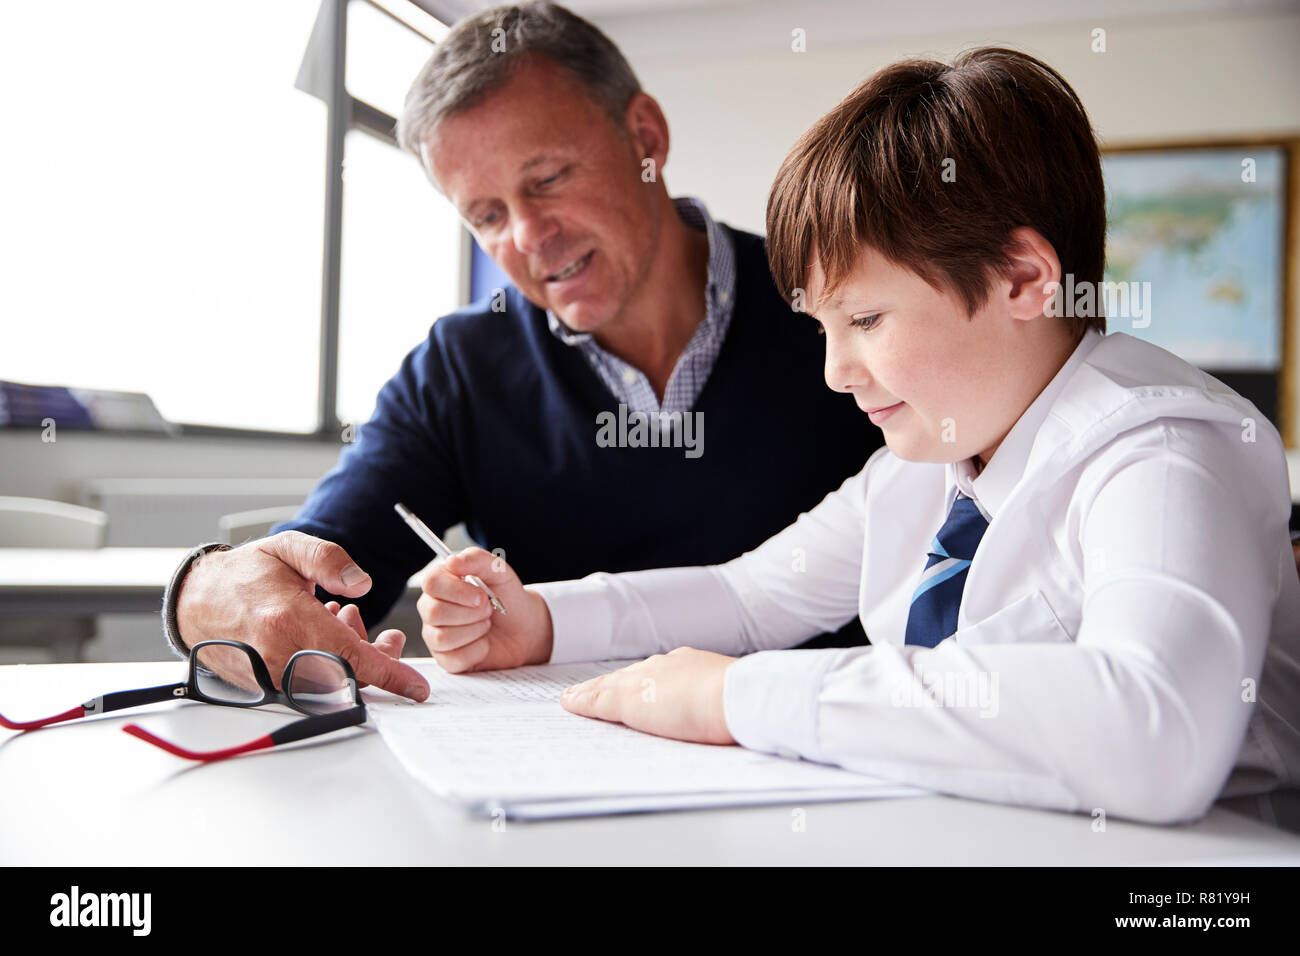 High School Tutor Giving Male Student Wearing Uniform One To One Tuition At Desk Stock Photo